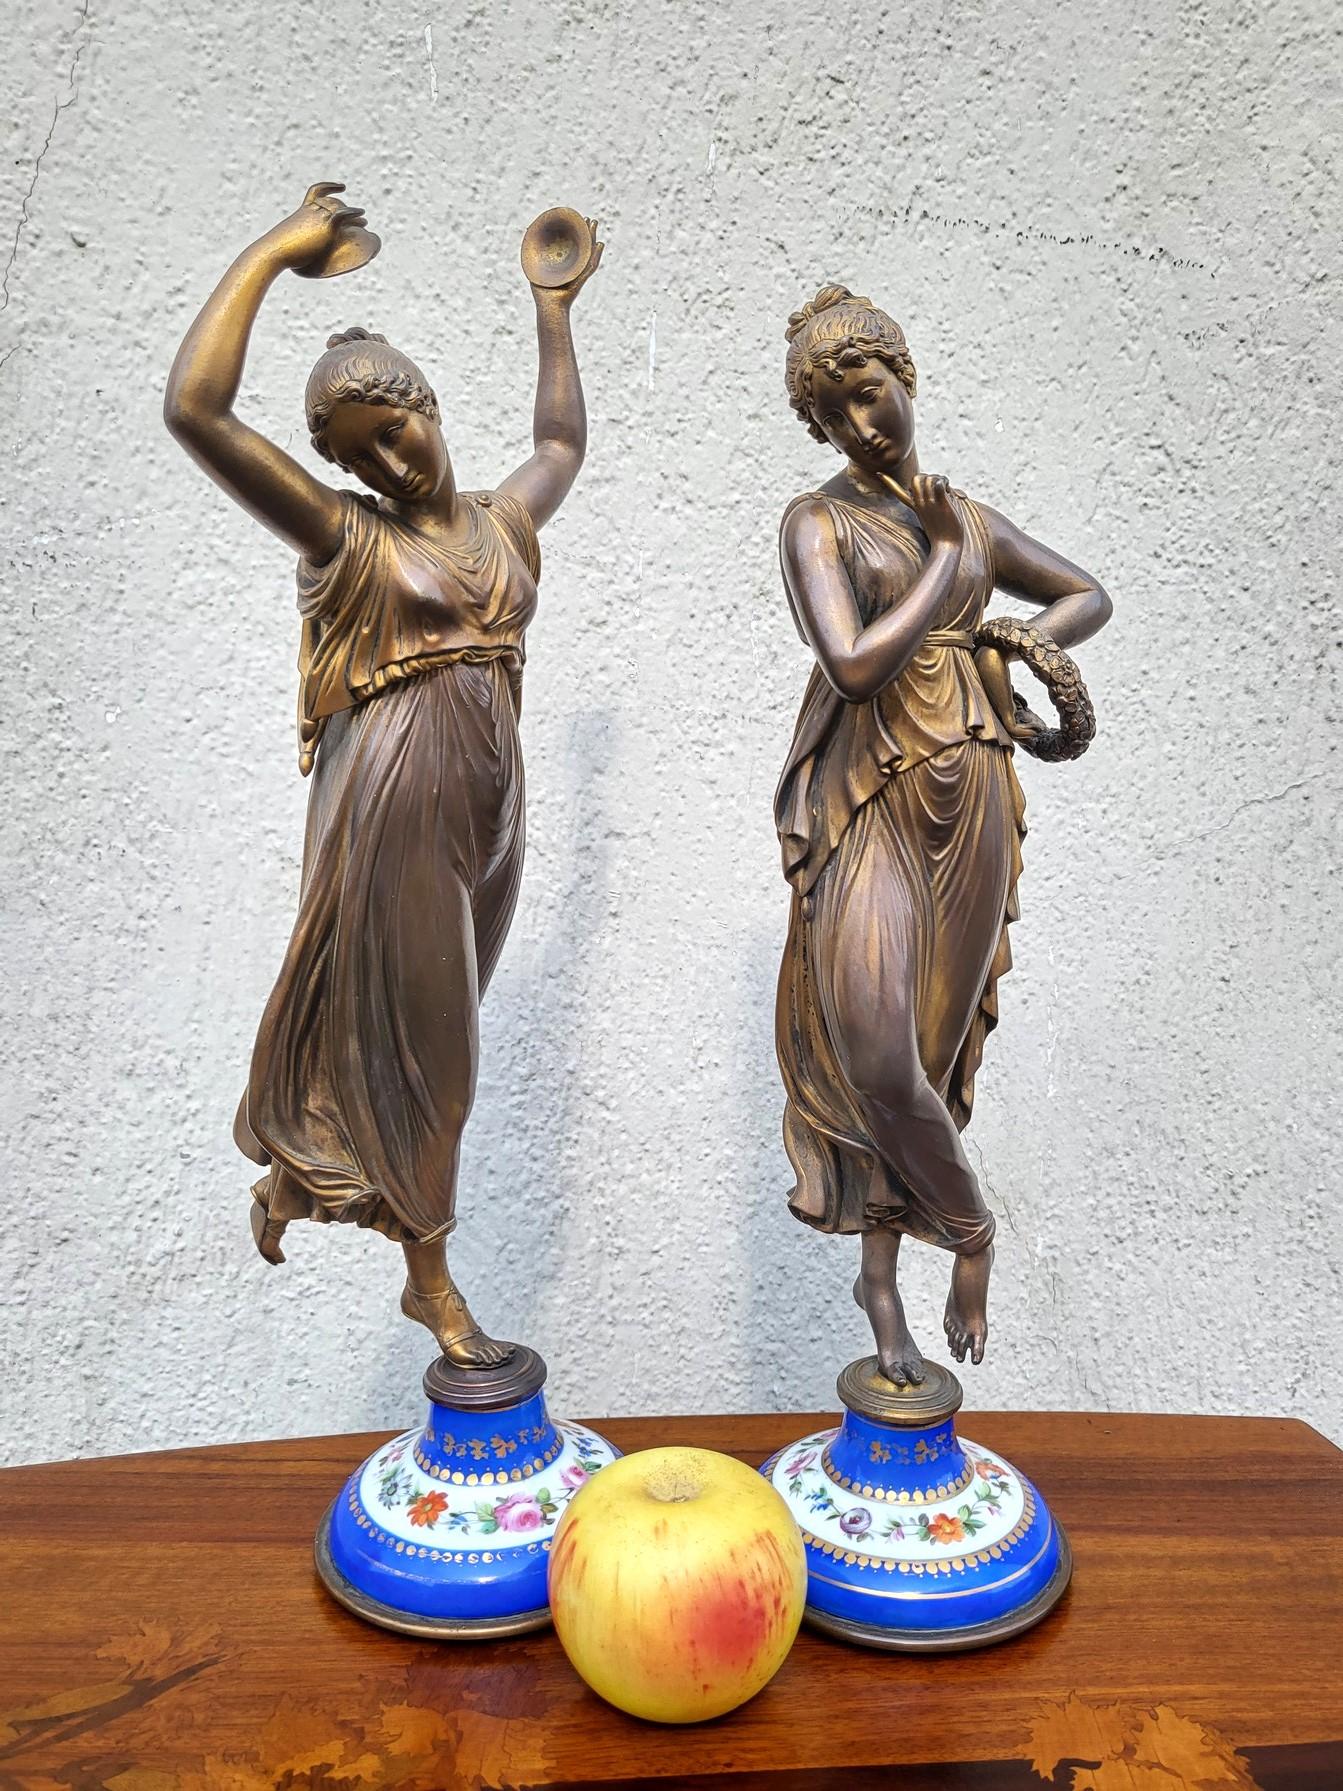 Pair of bronzes of a dancer and a musician, on a Paris porcelain base, model of sculptures after Canova

Restored bases, normal wear to the patina and decoration

XIXth century

Height 46.5cm
diameter approximately 15cm